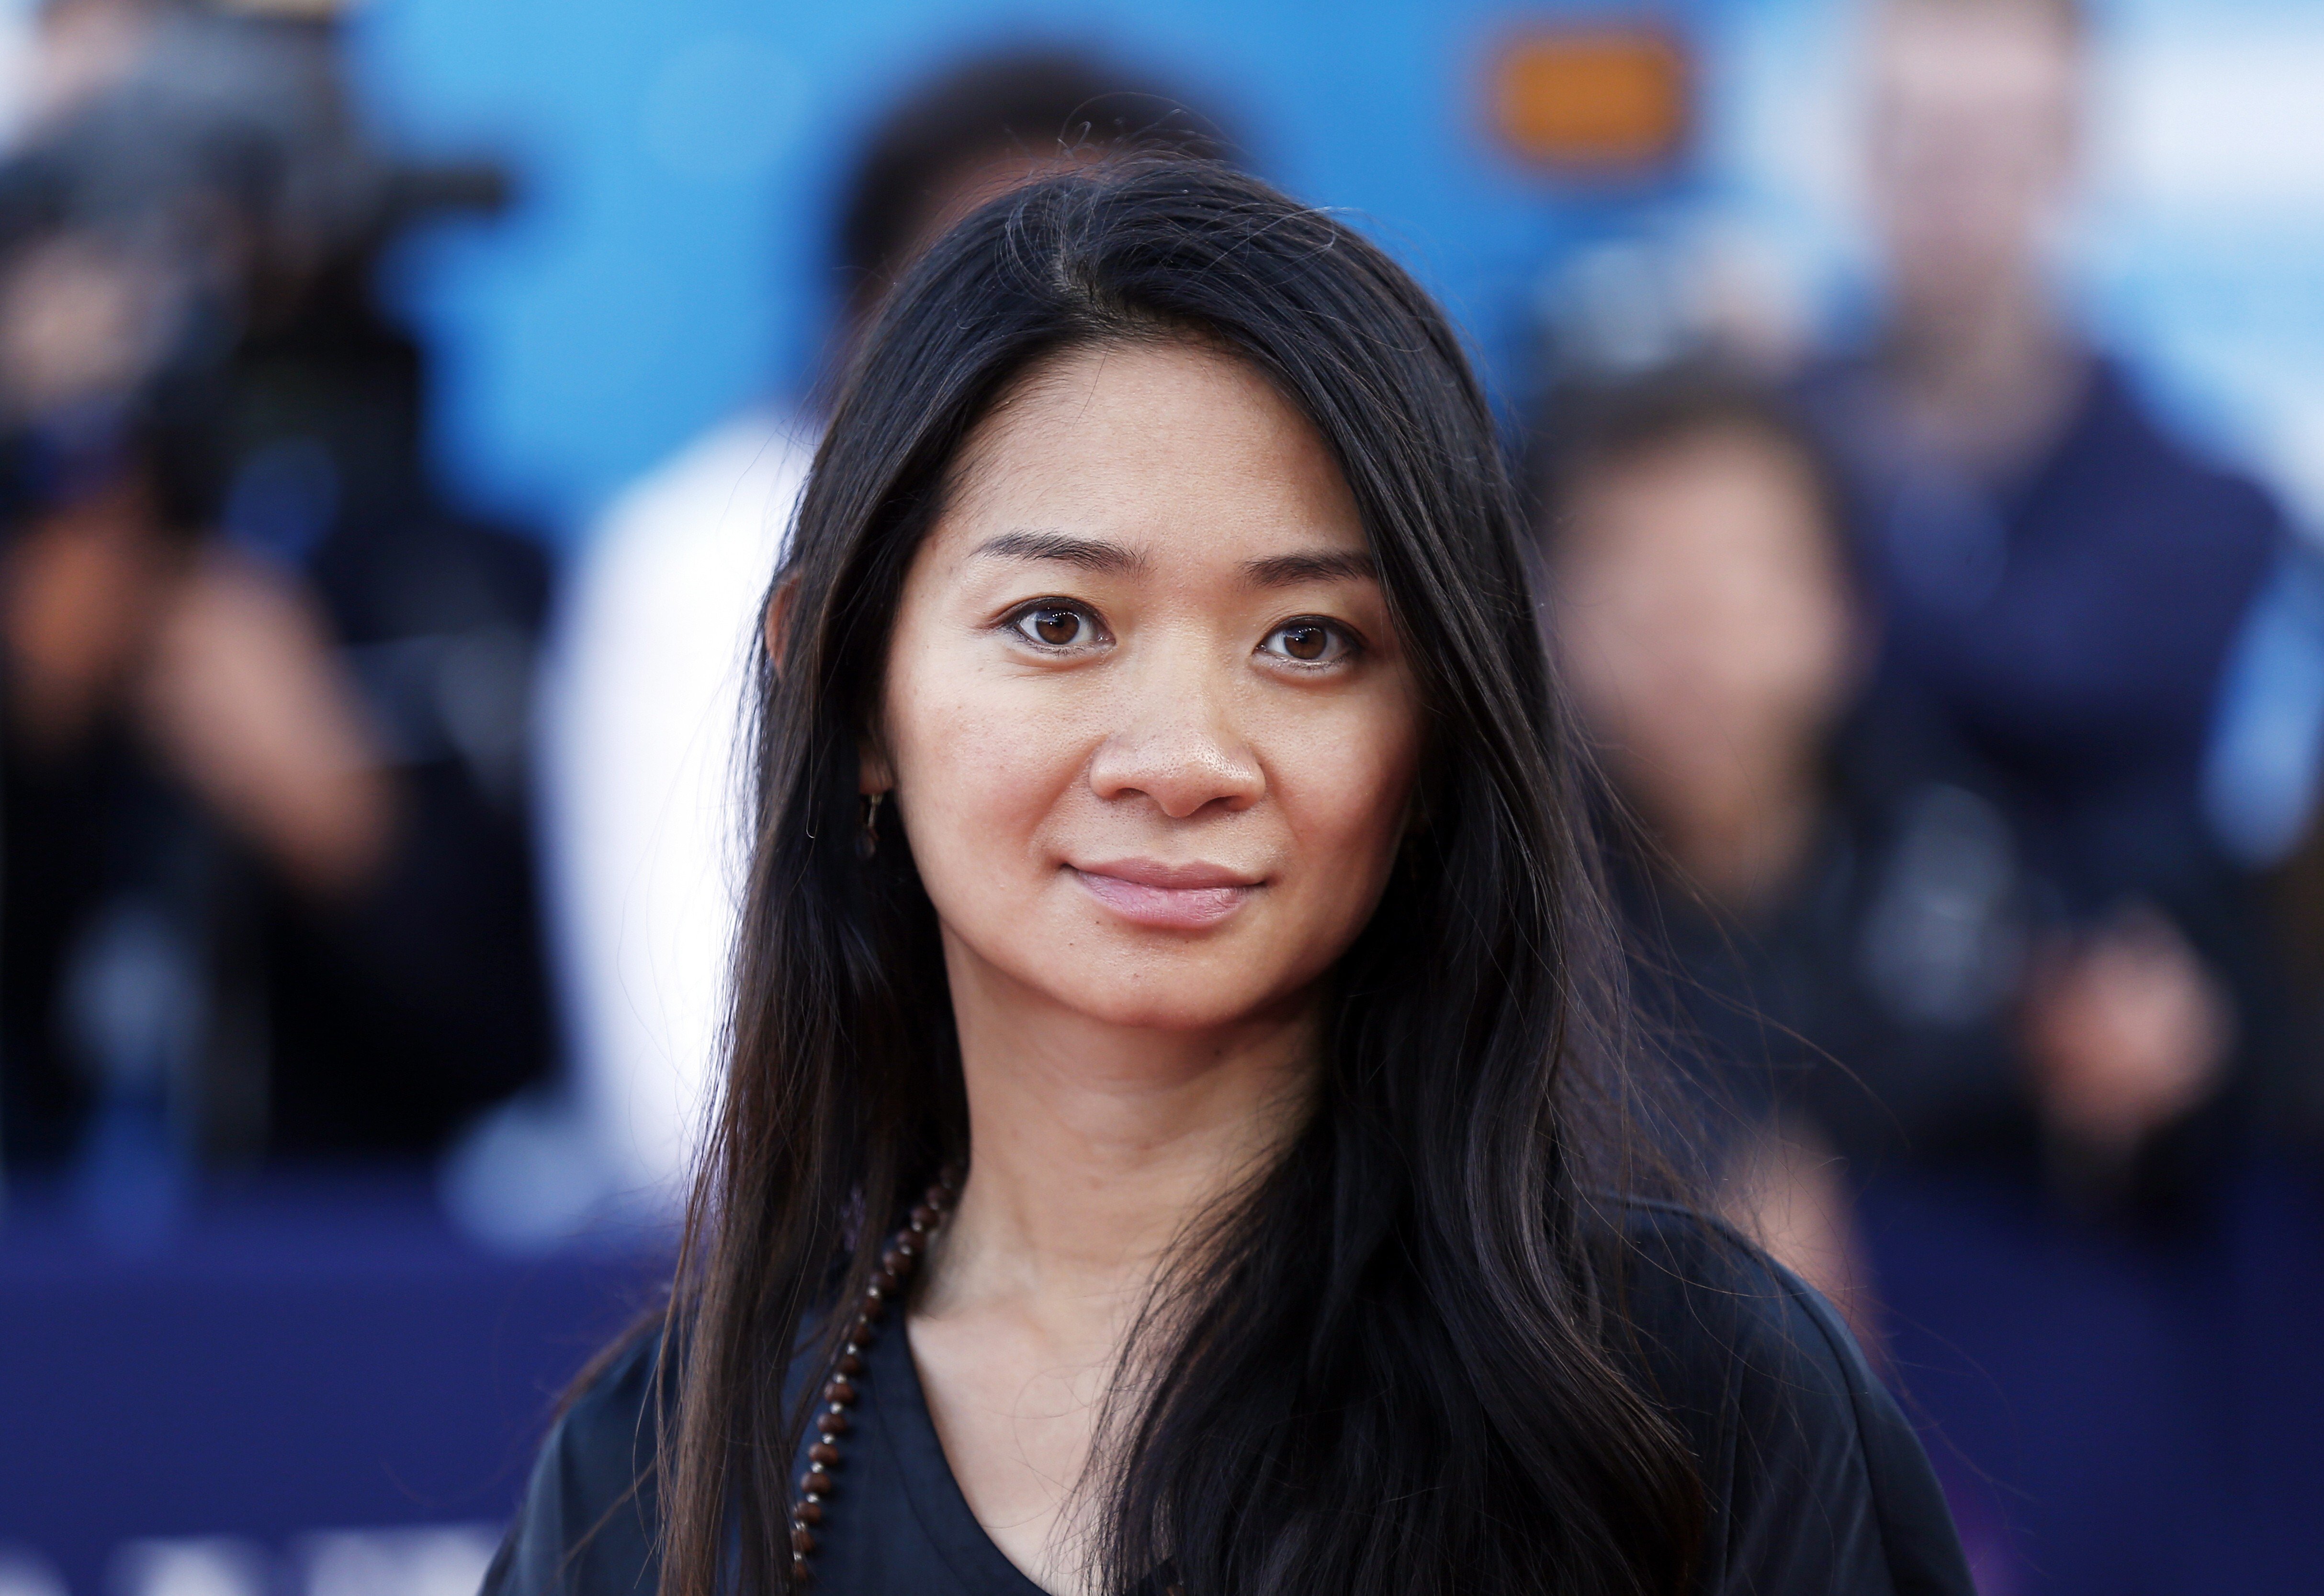 Director Chloé Zhao arrives on the red carpet during 41st Deauville American Film Festival in France in September 2015. Photo: EPA-EFE